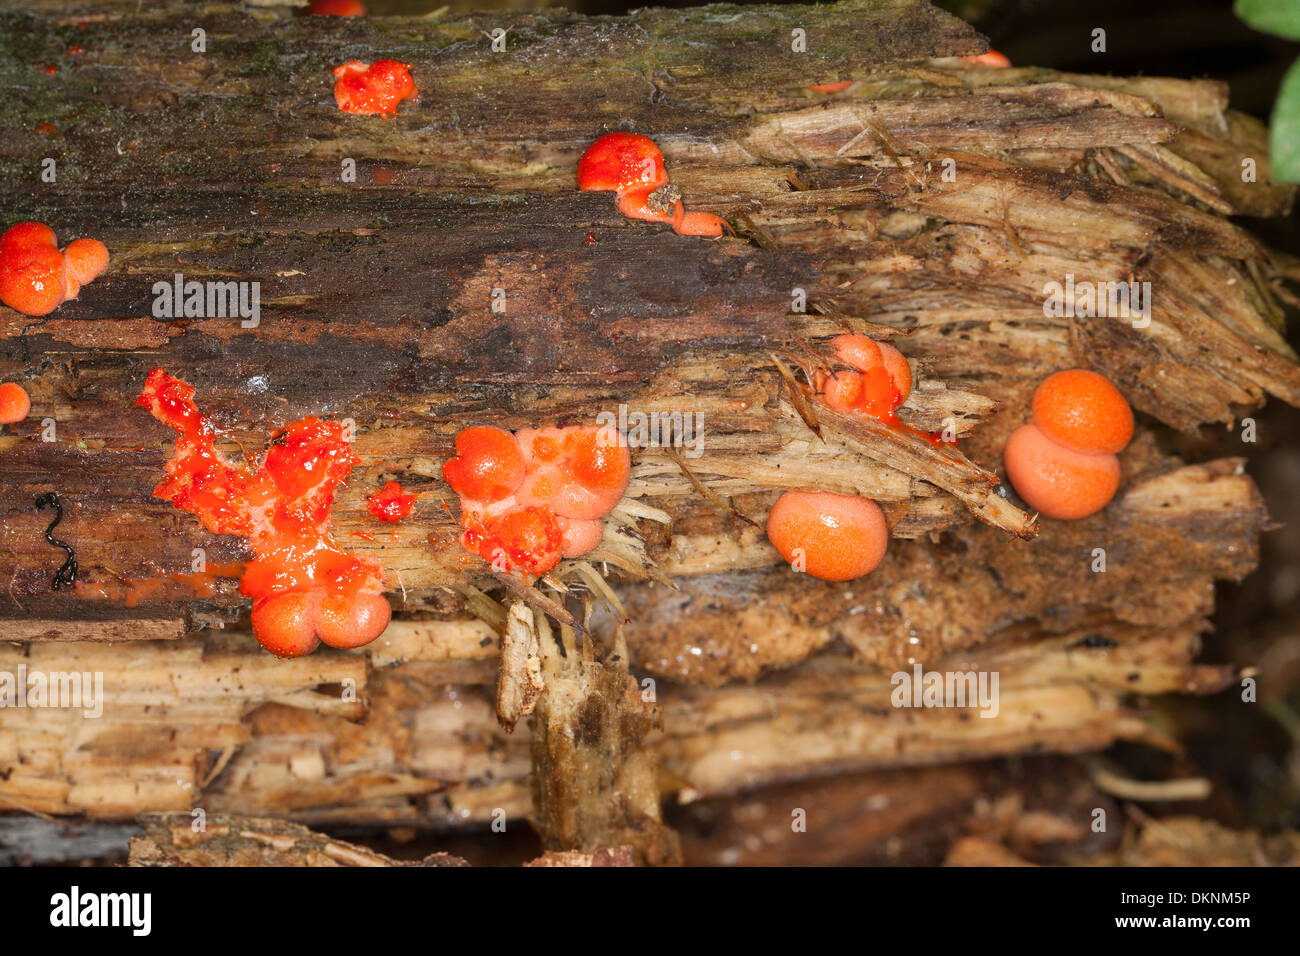 wolf's milk, groening's slime, plasmodial slime mould, Blutmilchpilz, Blut-Milchpilz, Schleimpilz, Lycogala epidendrum Stock Photo